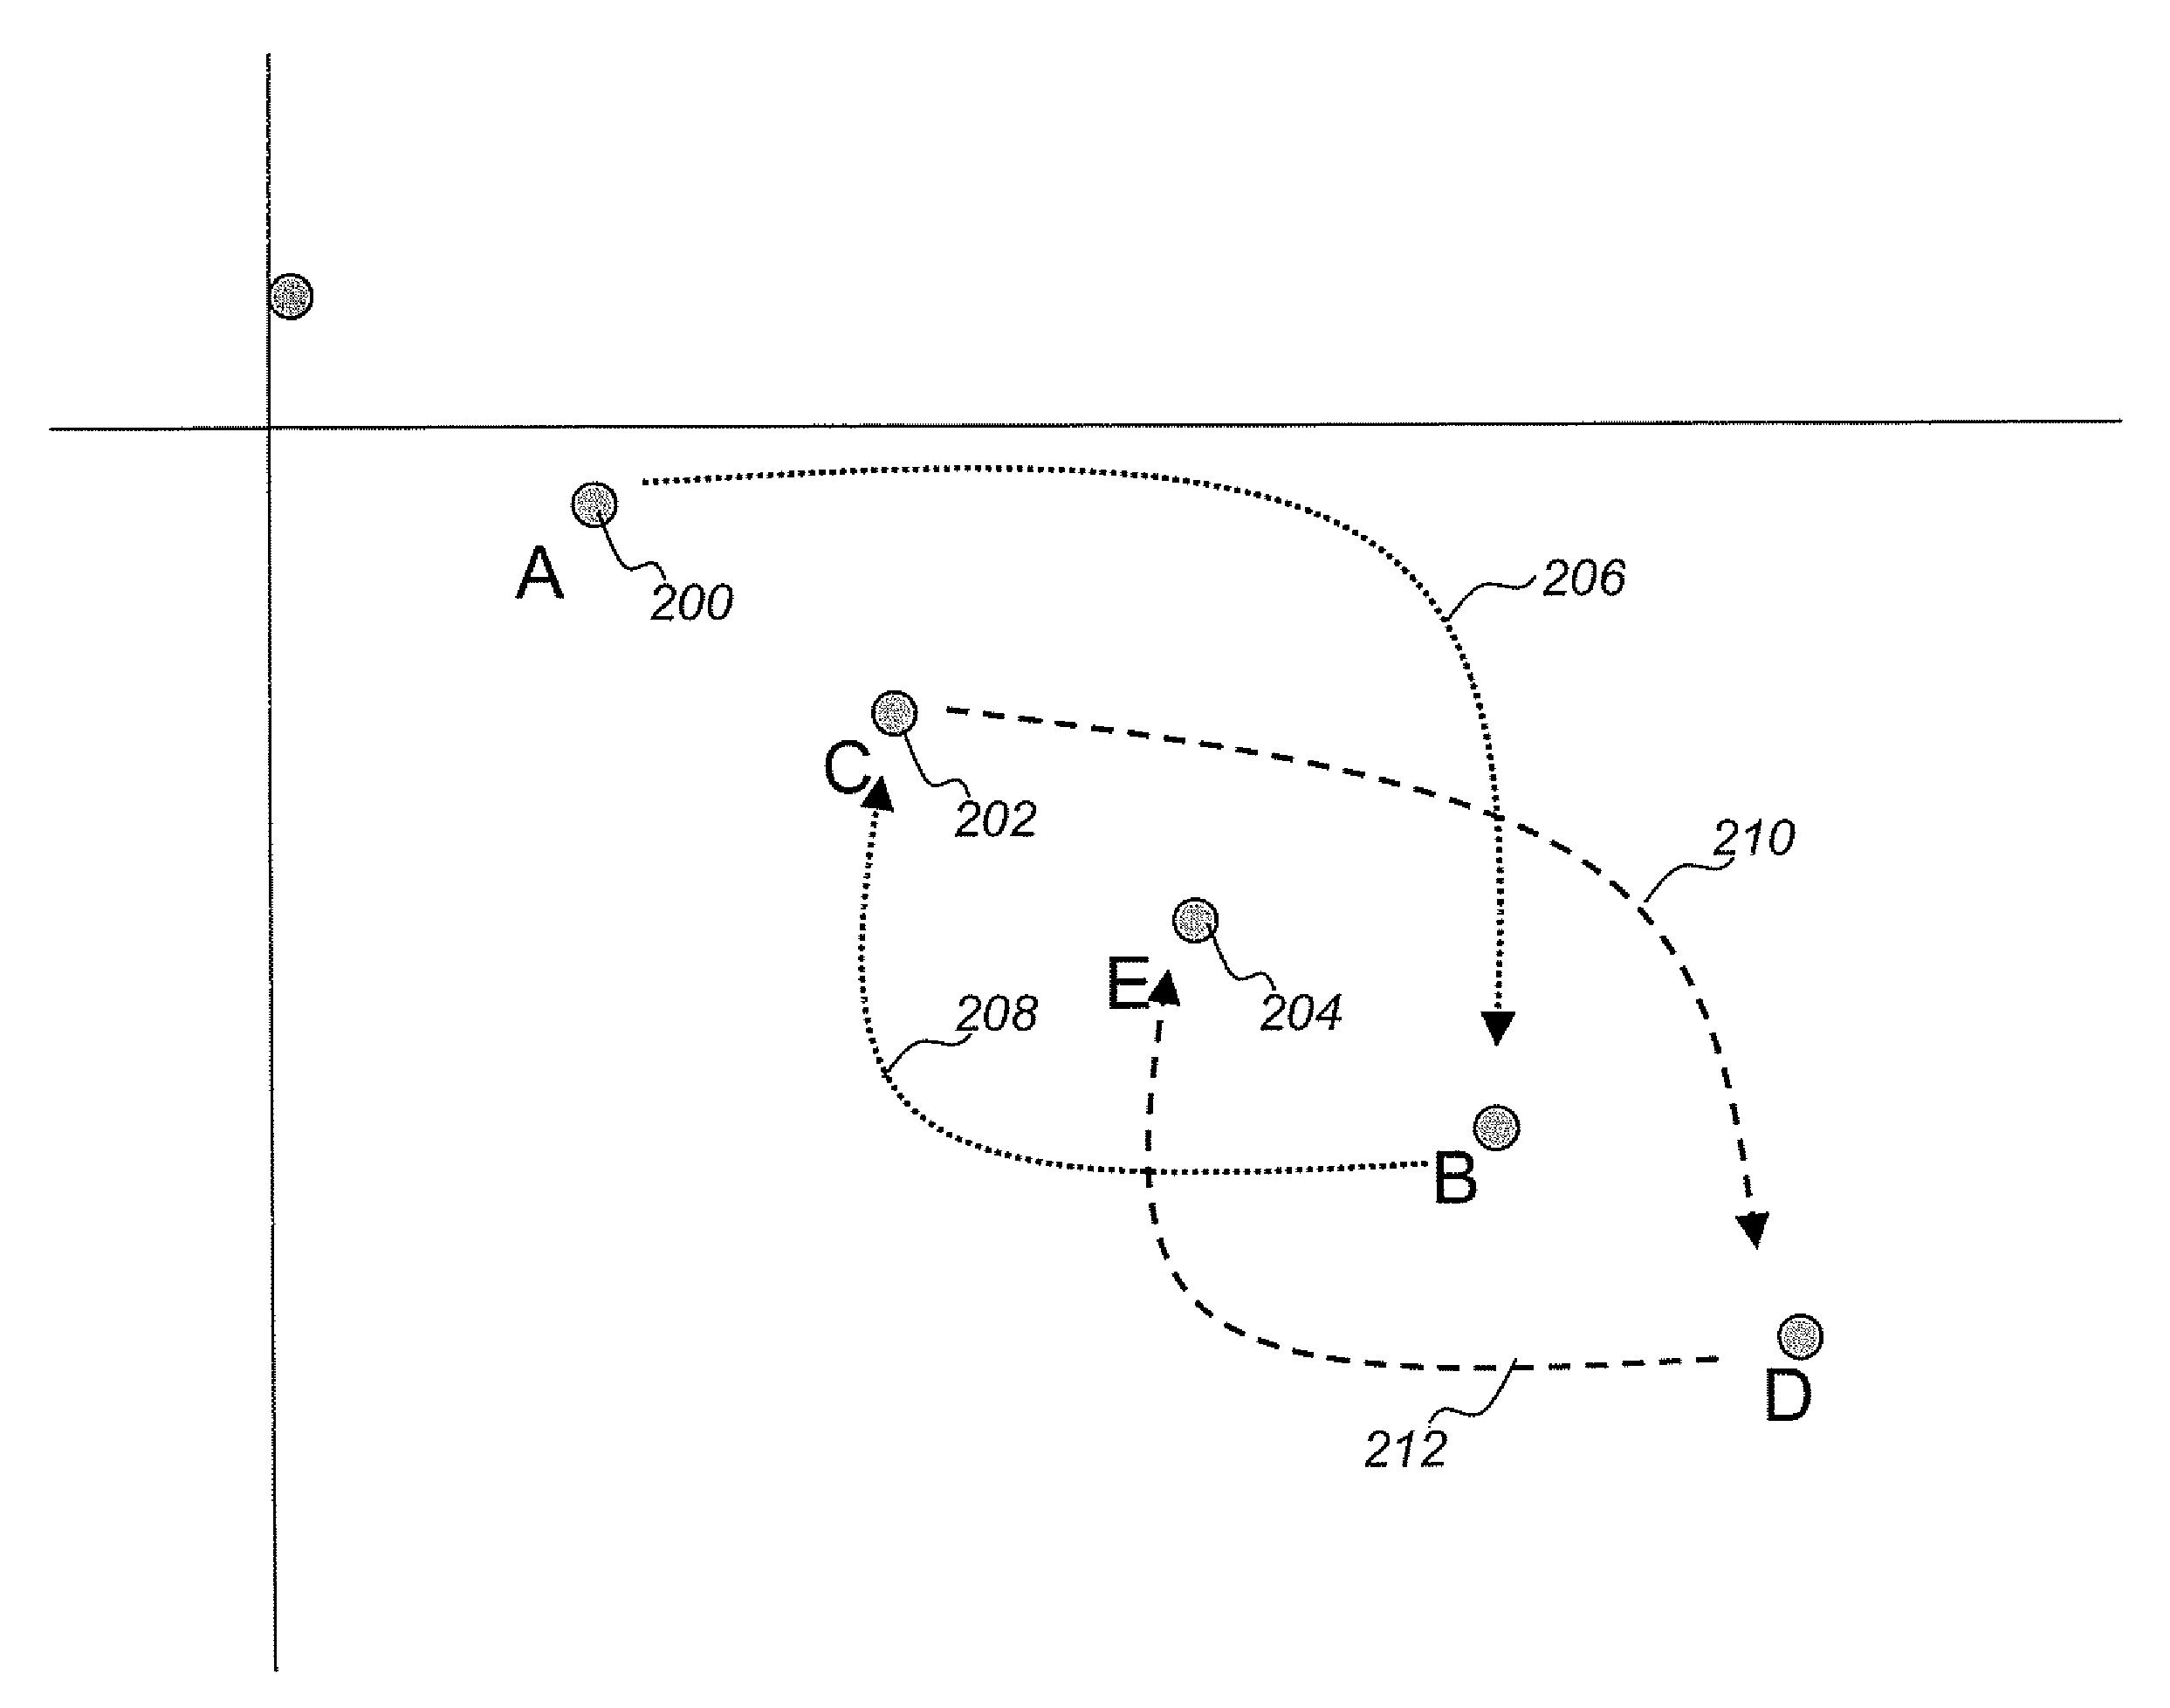 Method and System for Helicopter Portable Drilling